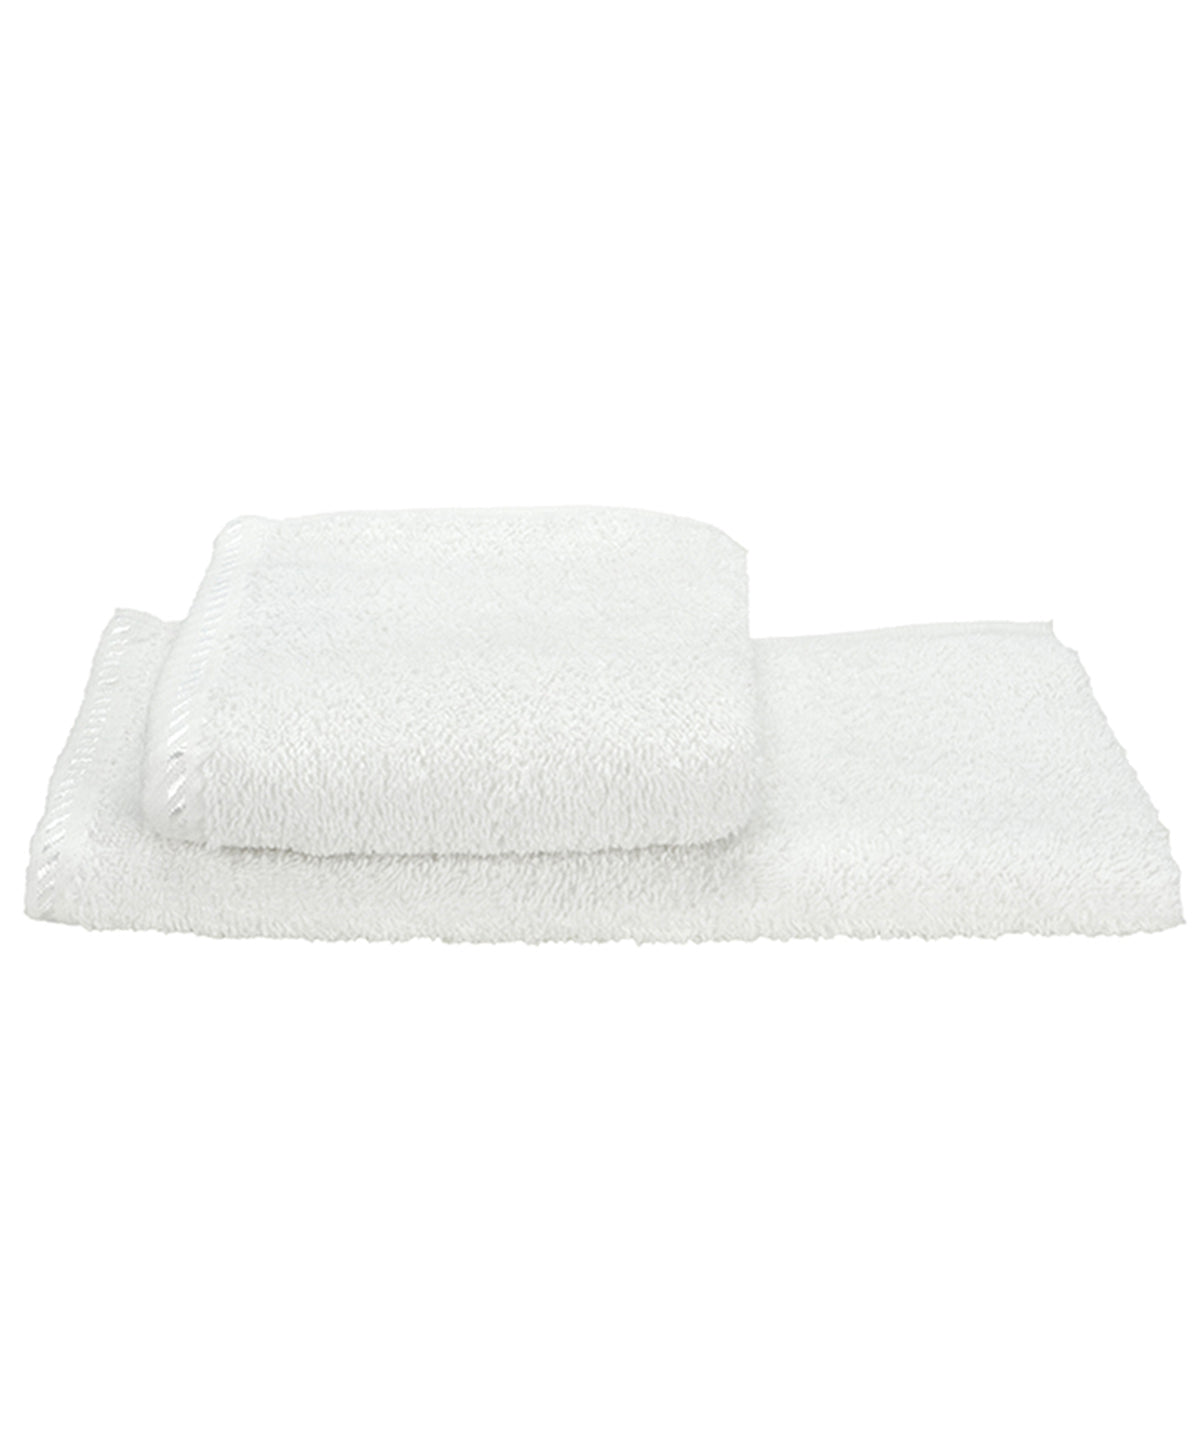 Personalised Towels - White A&R Towels ARTG® Guest towel